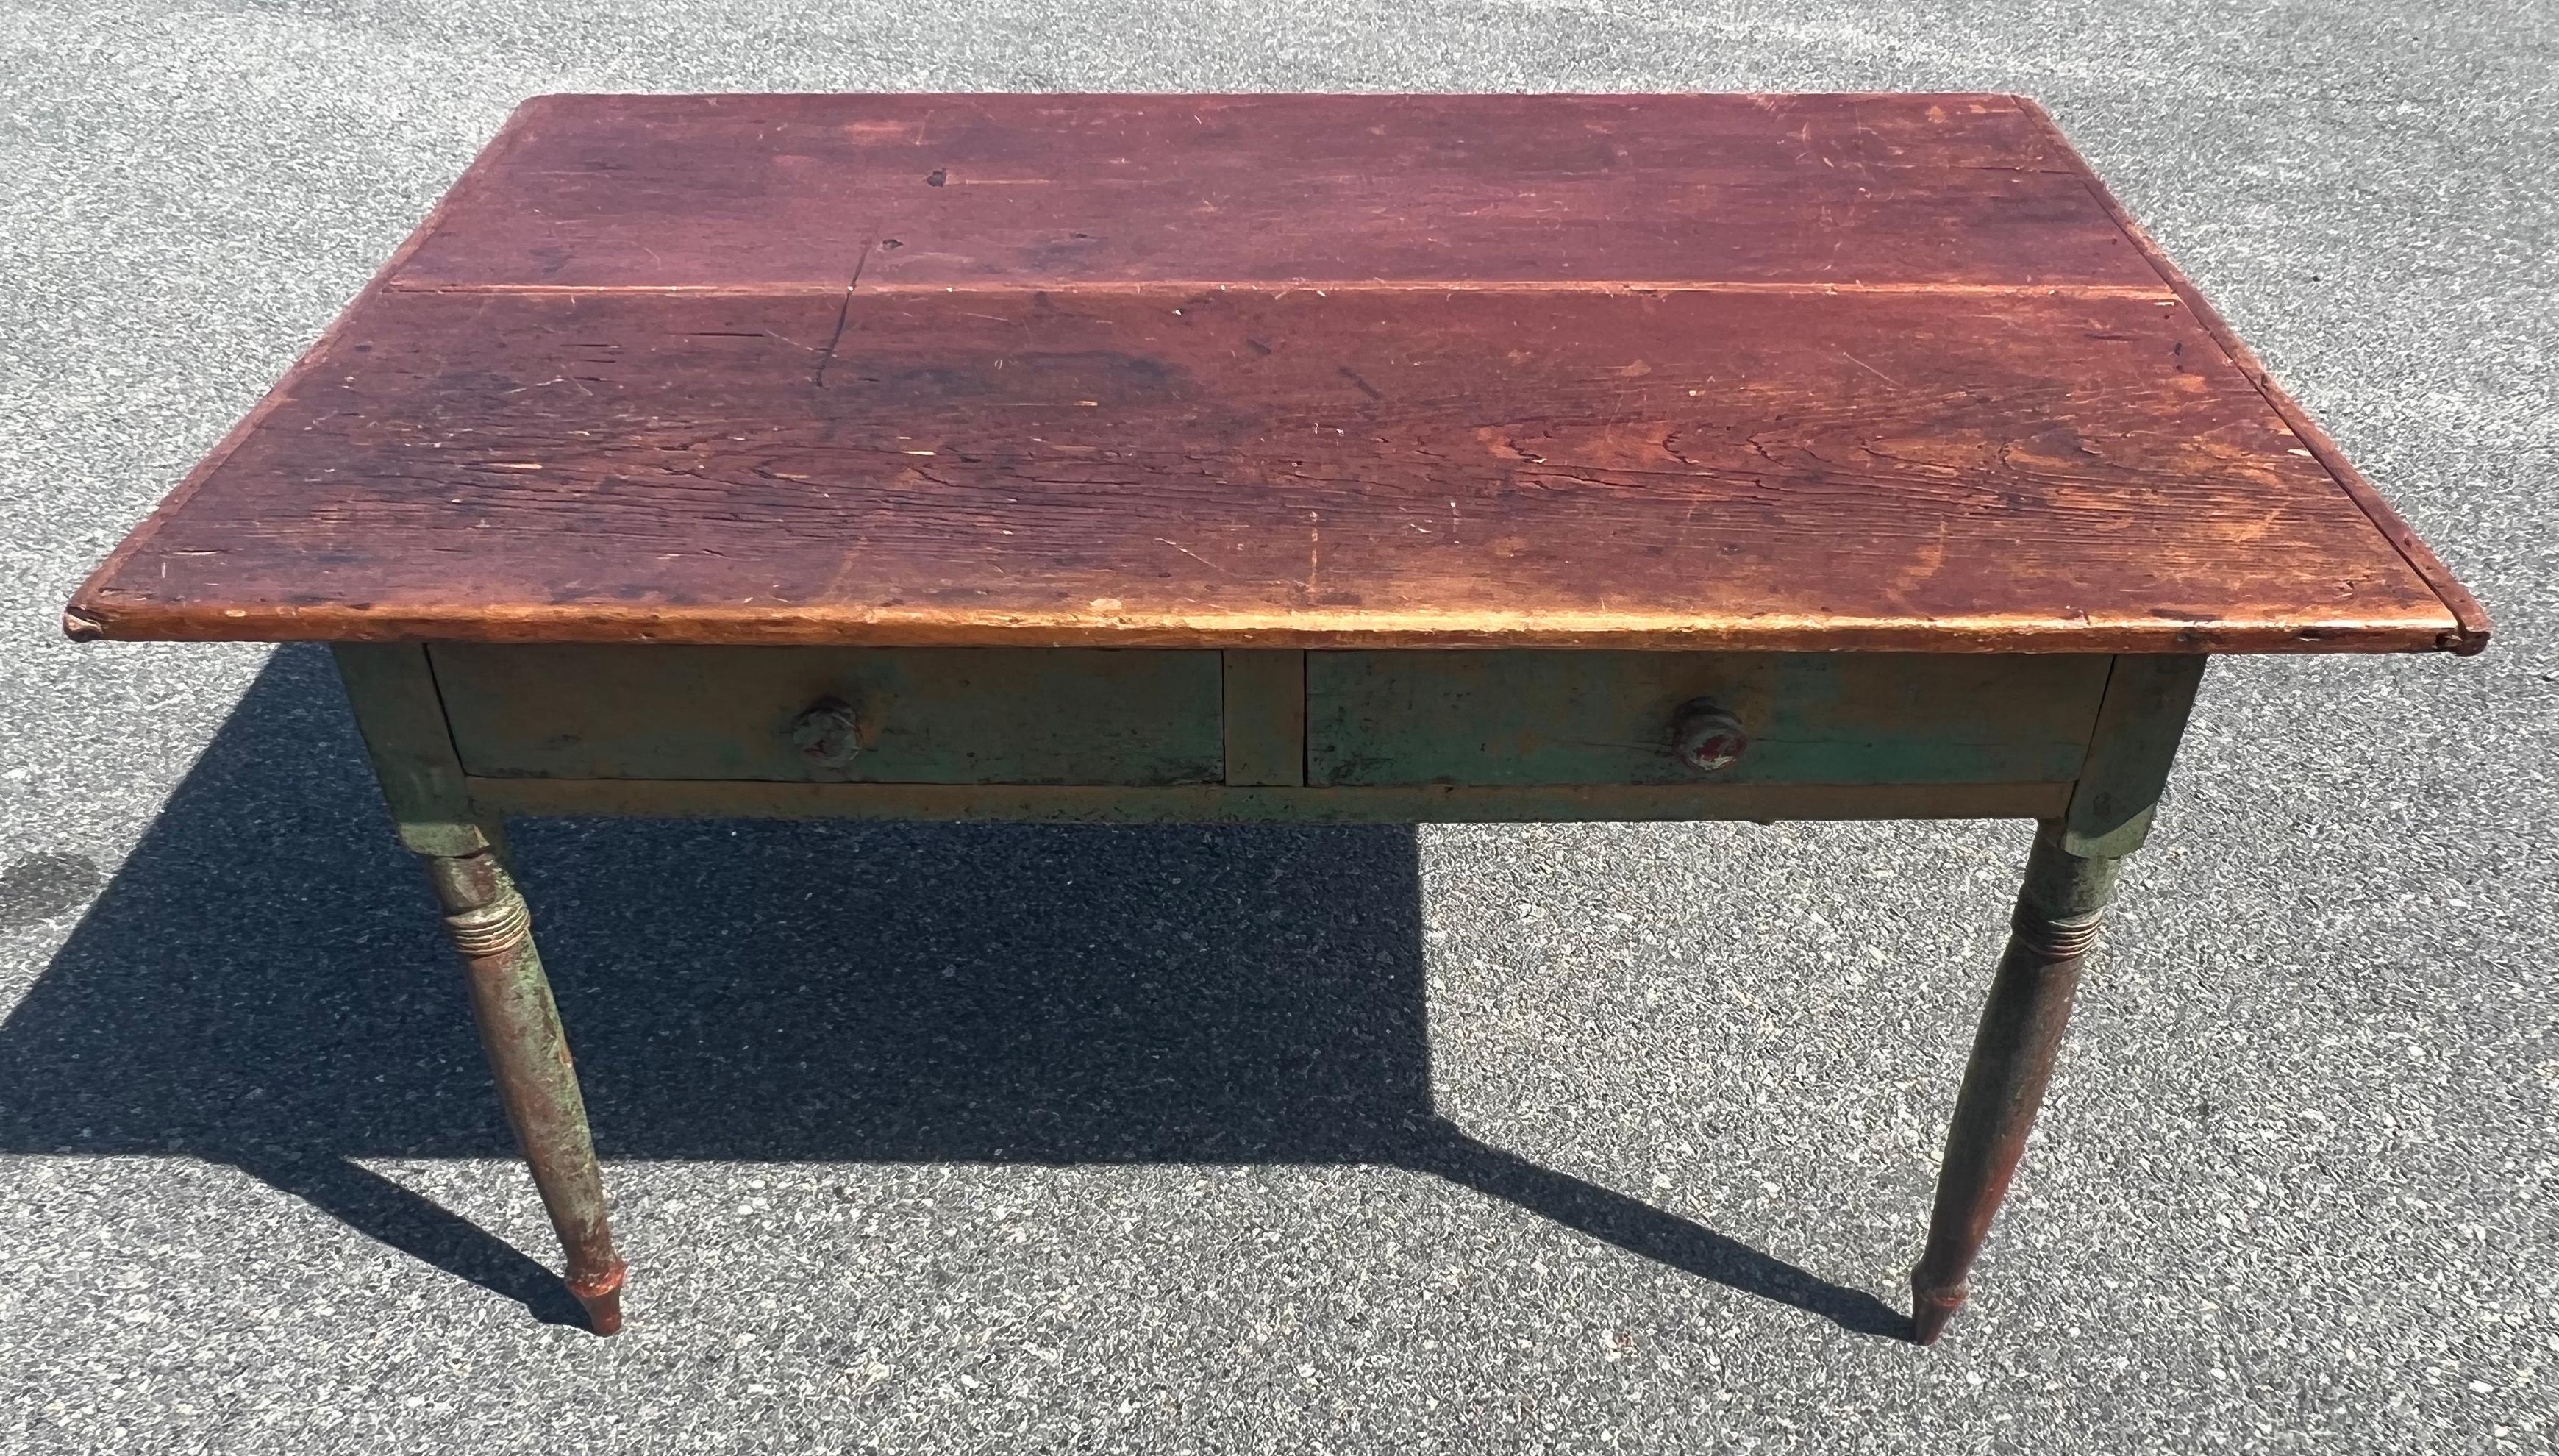 19th Century Pine Desk Table with Painted Base In Good Condition For Sale In Nantucket, MA